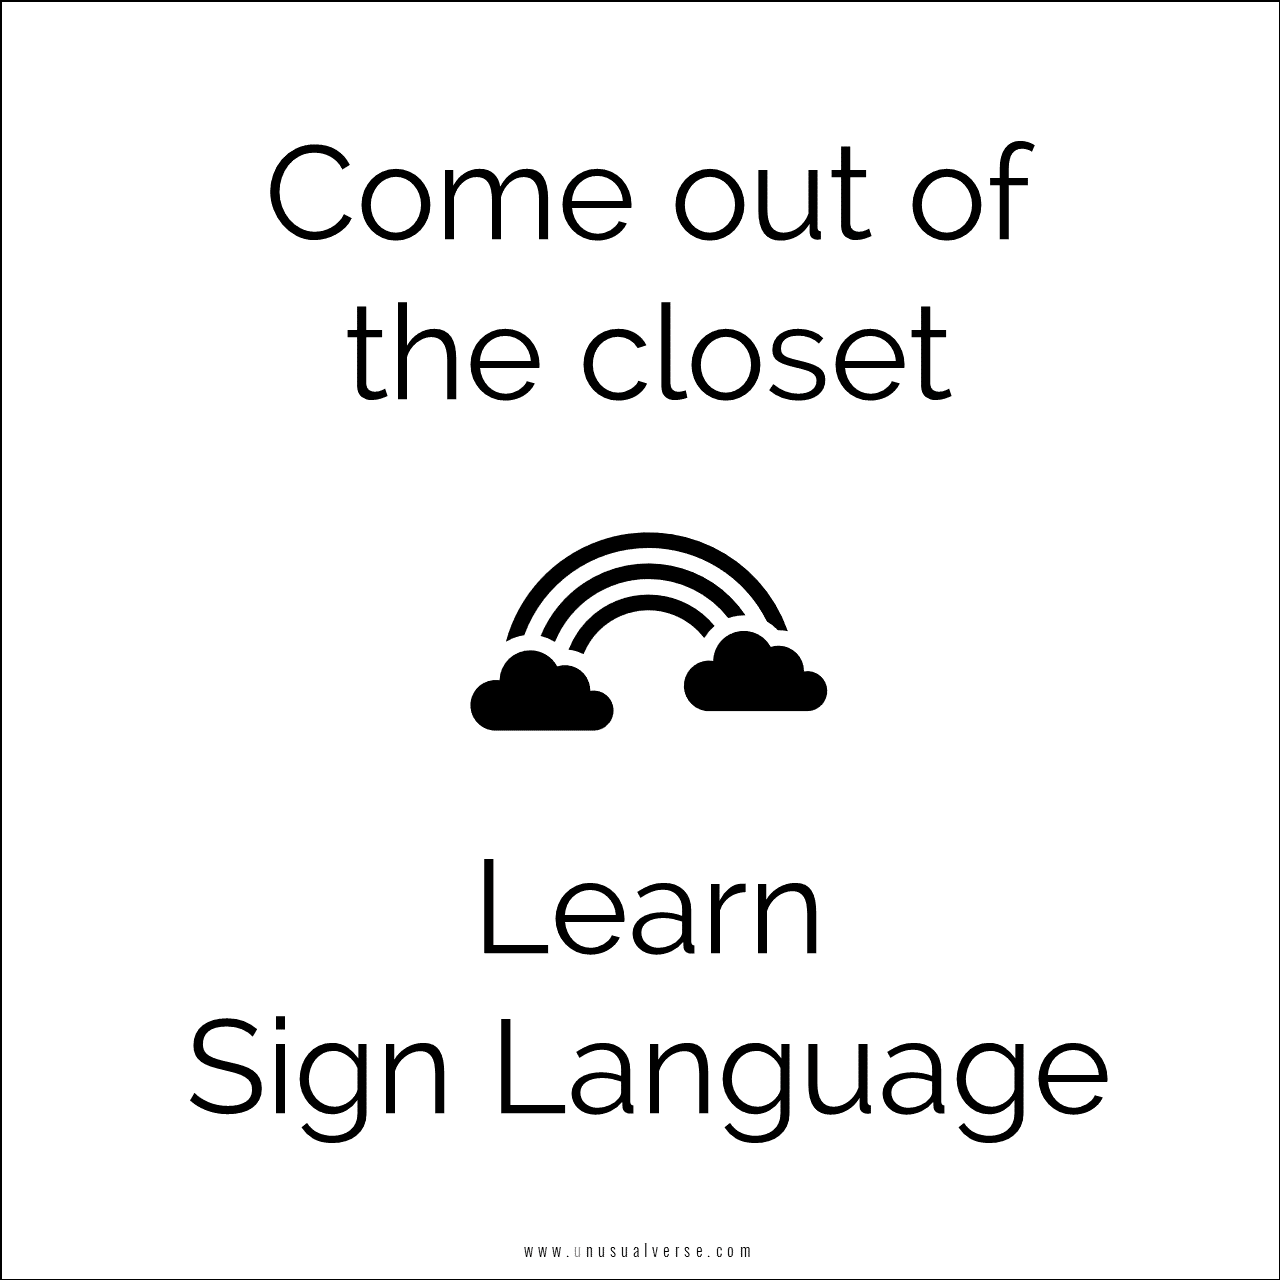 Come out of the closet. Learn Sign Language